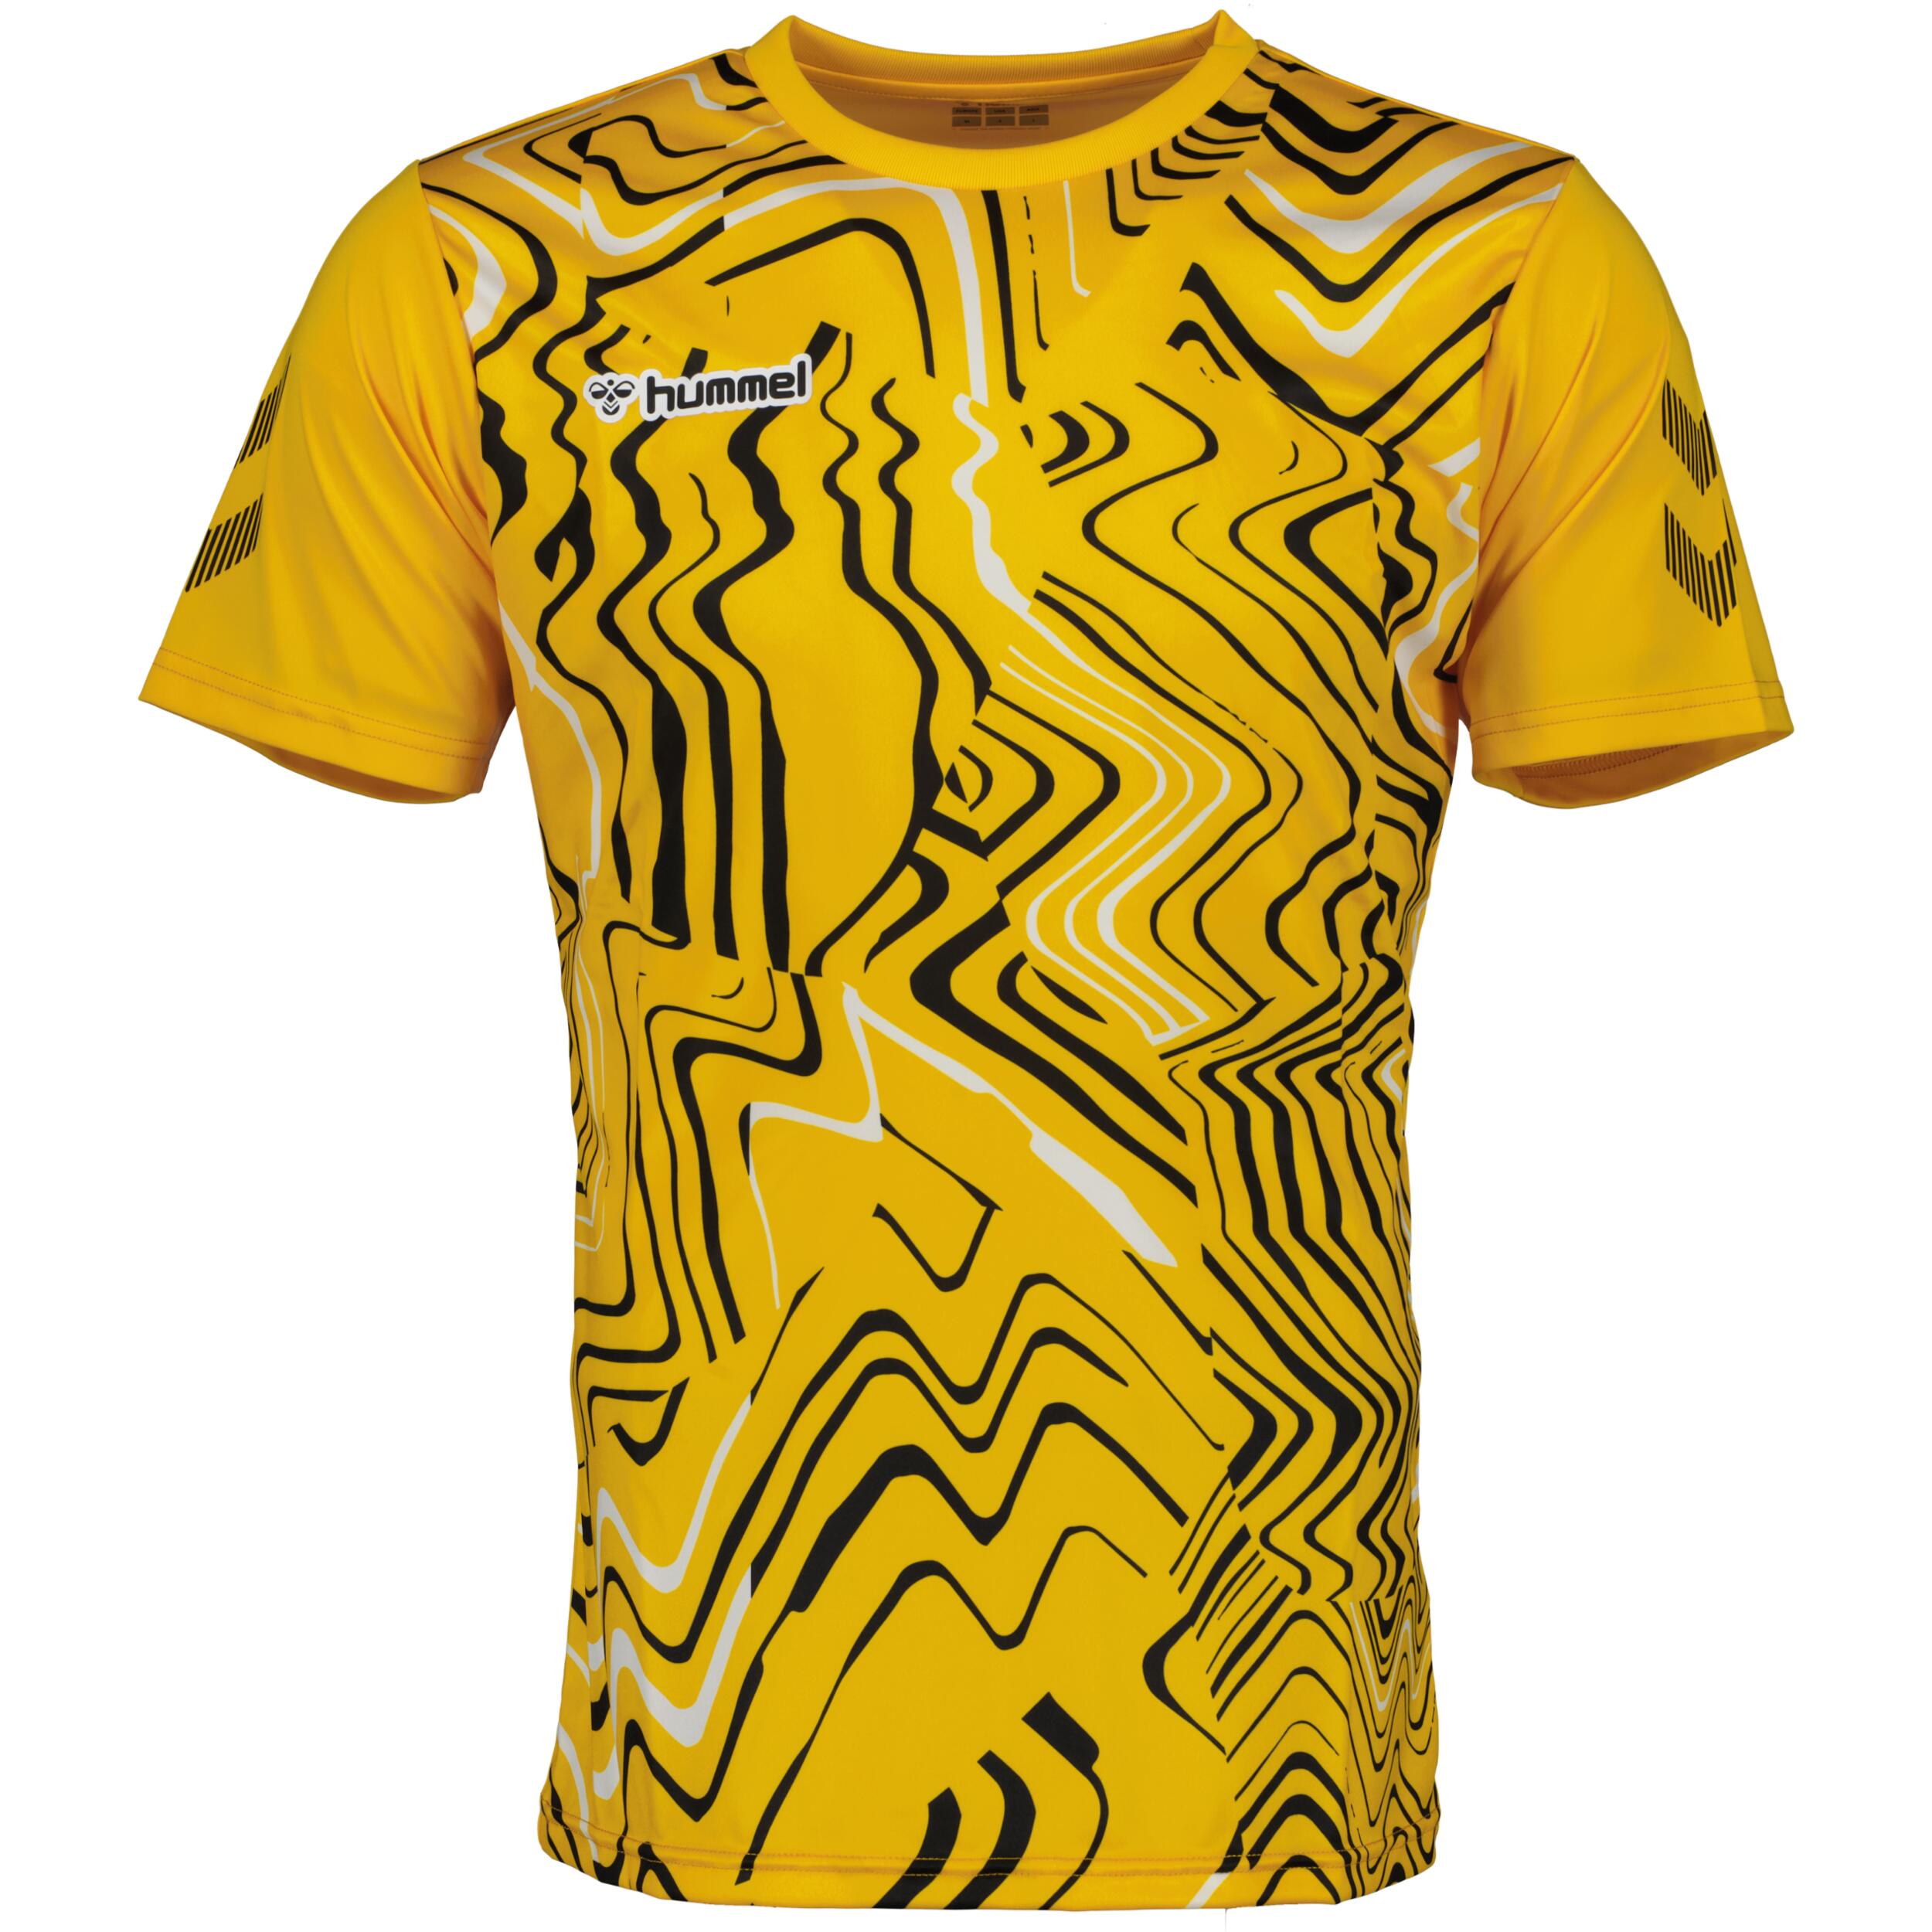 HUMMEL Hydro jersey for men, great for football, in sports yellow/black/white